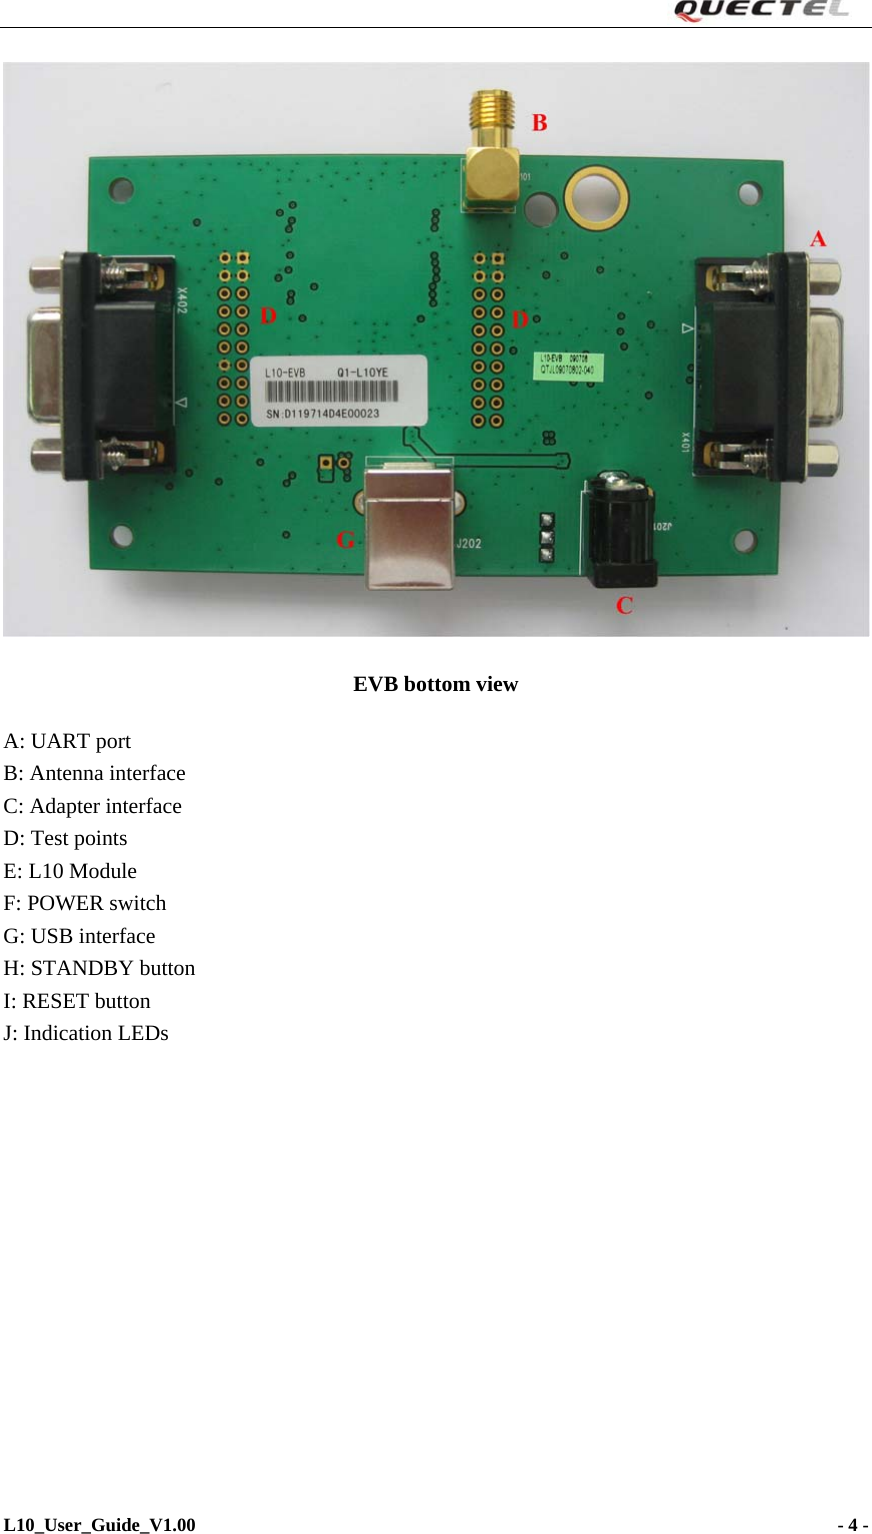                                                                      EVB bottom view A: UART port B: Antenna interface C: Adapter interface D: Test points E: L10 Module F: POWER switch G: USB interface H: STANDBY button I: RESET button J: Indication LEDs L10_User_Guide_V1.00                                                                     - 4 -   